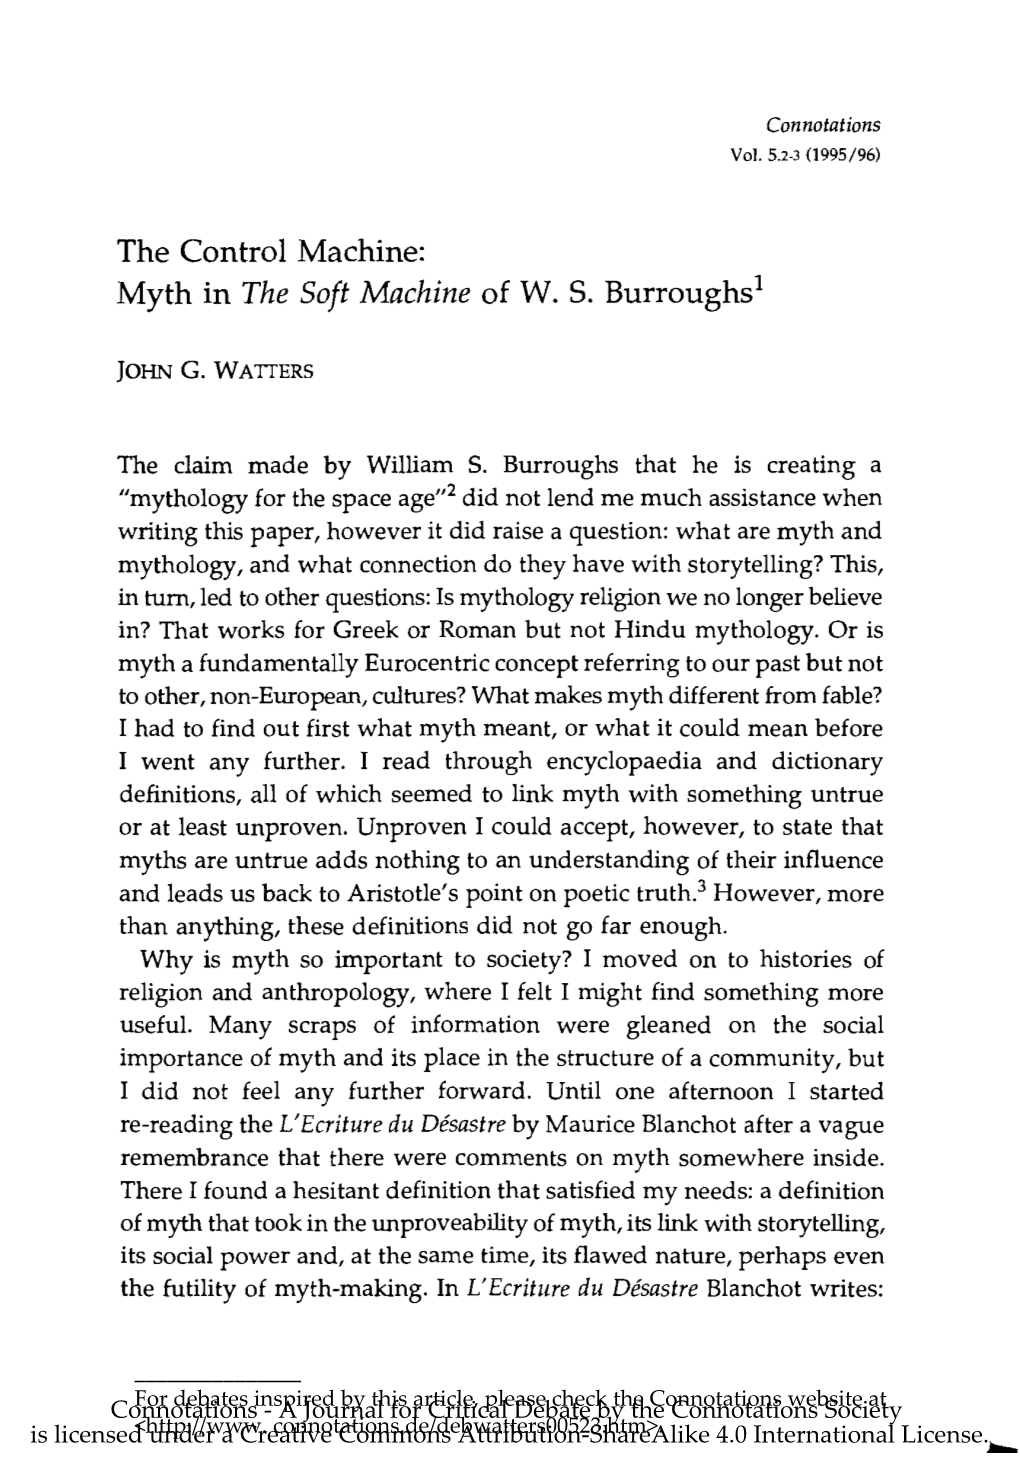 Myth in the Soft Machine of WS Burroughs